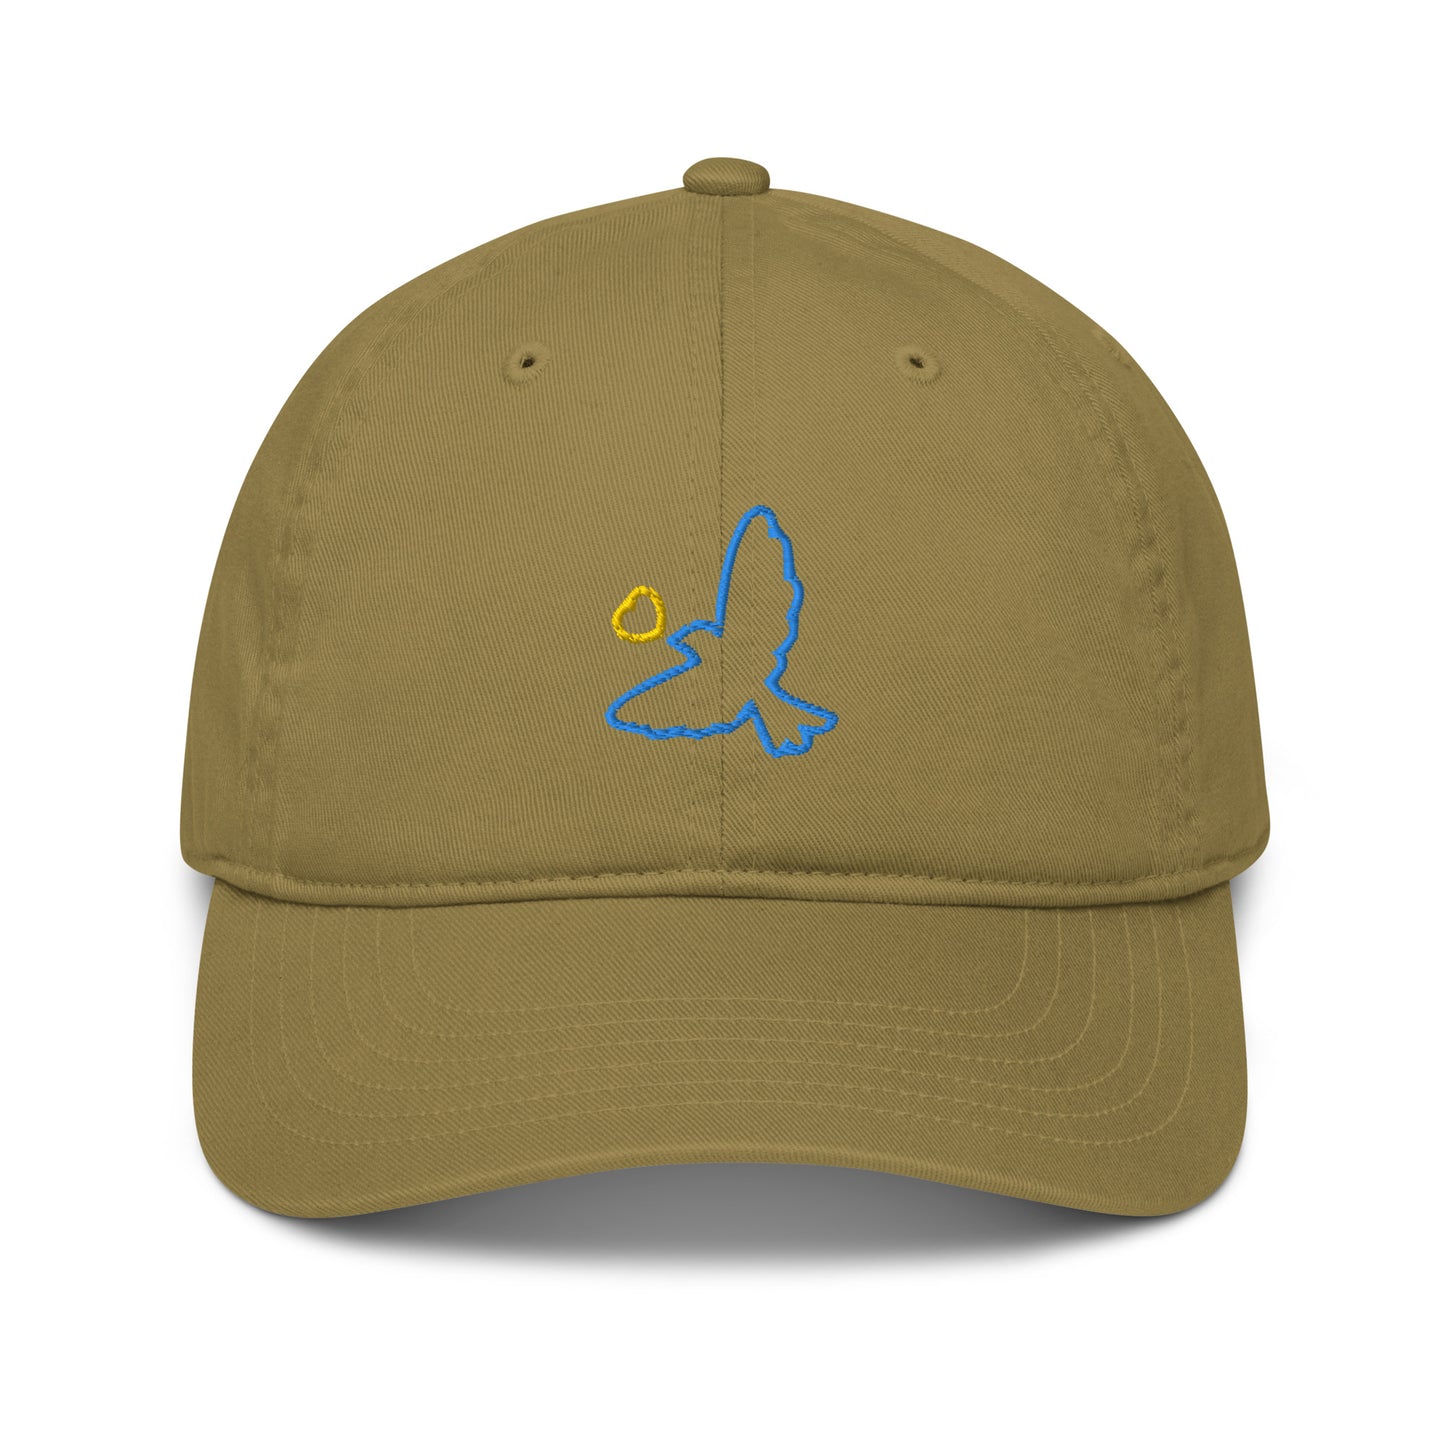 Stand With Ukraine Cap/Hat (Donation To Charity)